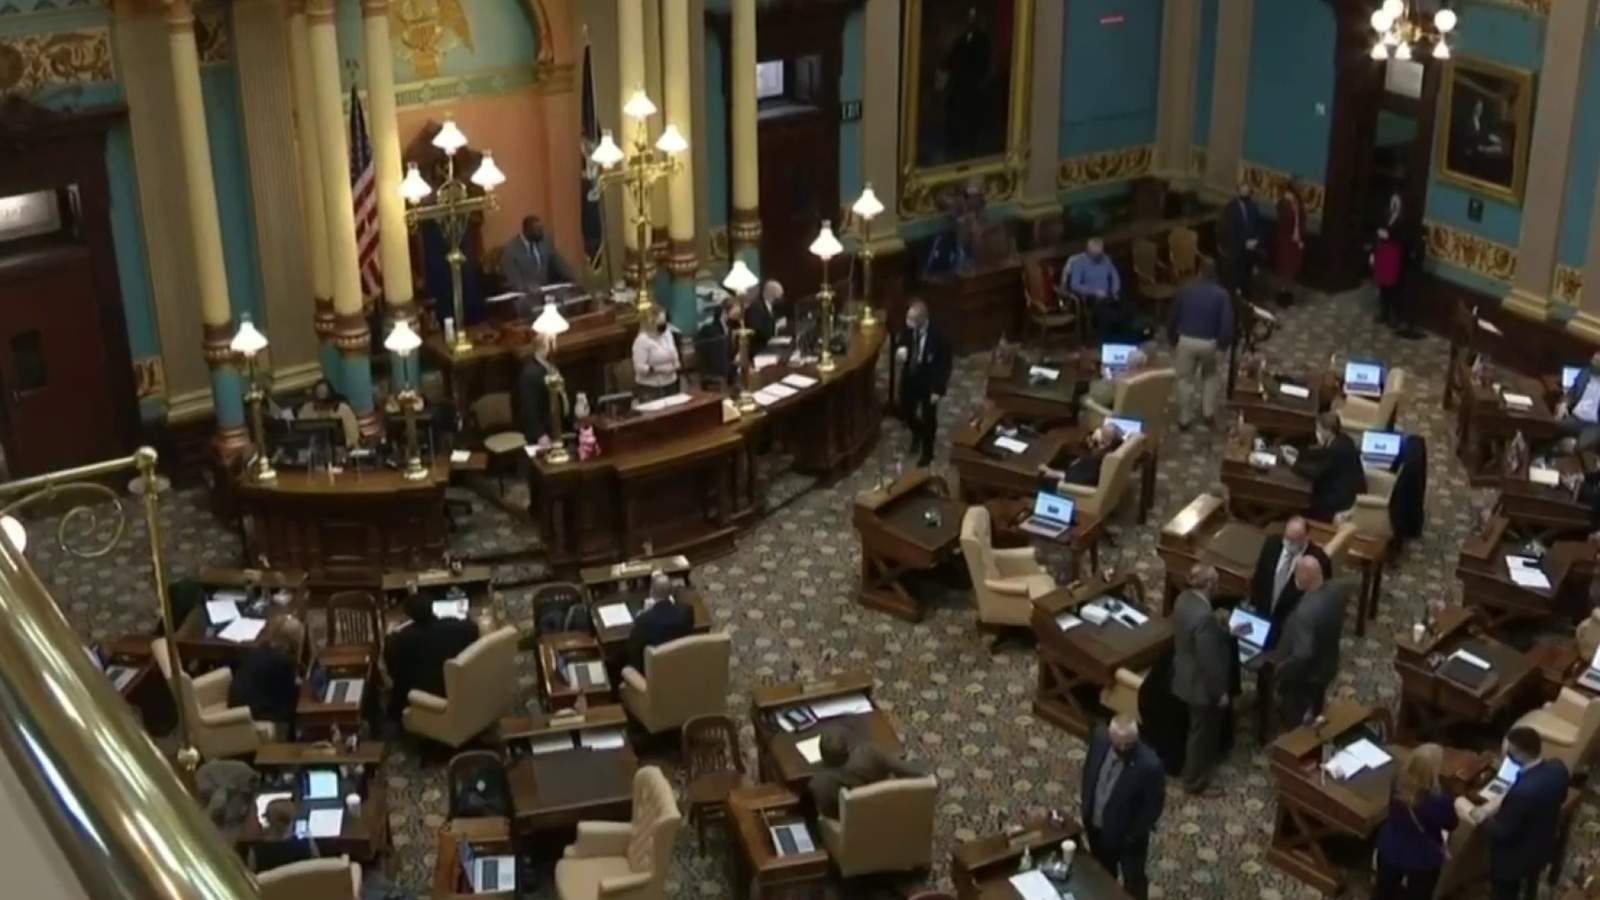 What are the top priorities for the new session of Michigan Congress?